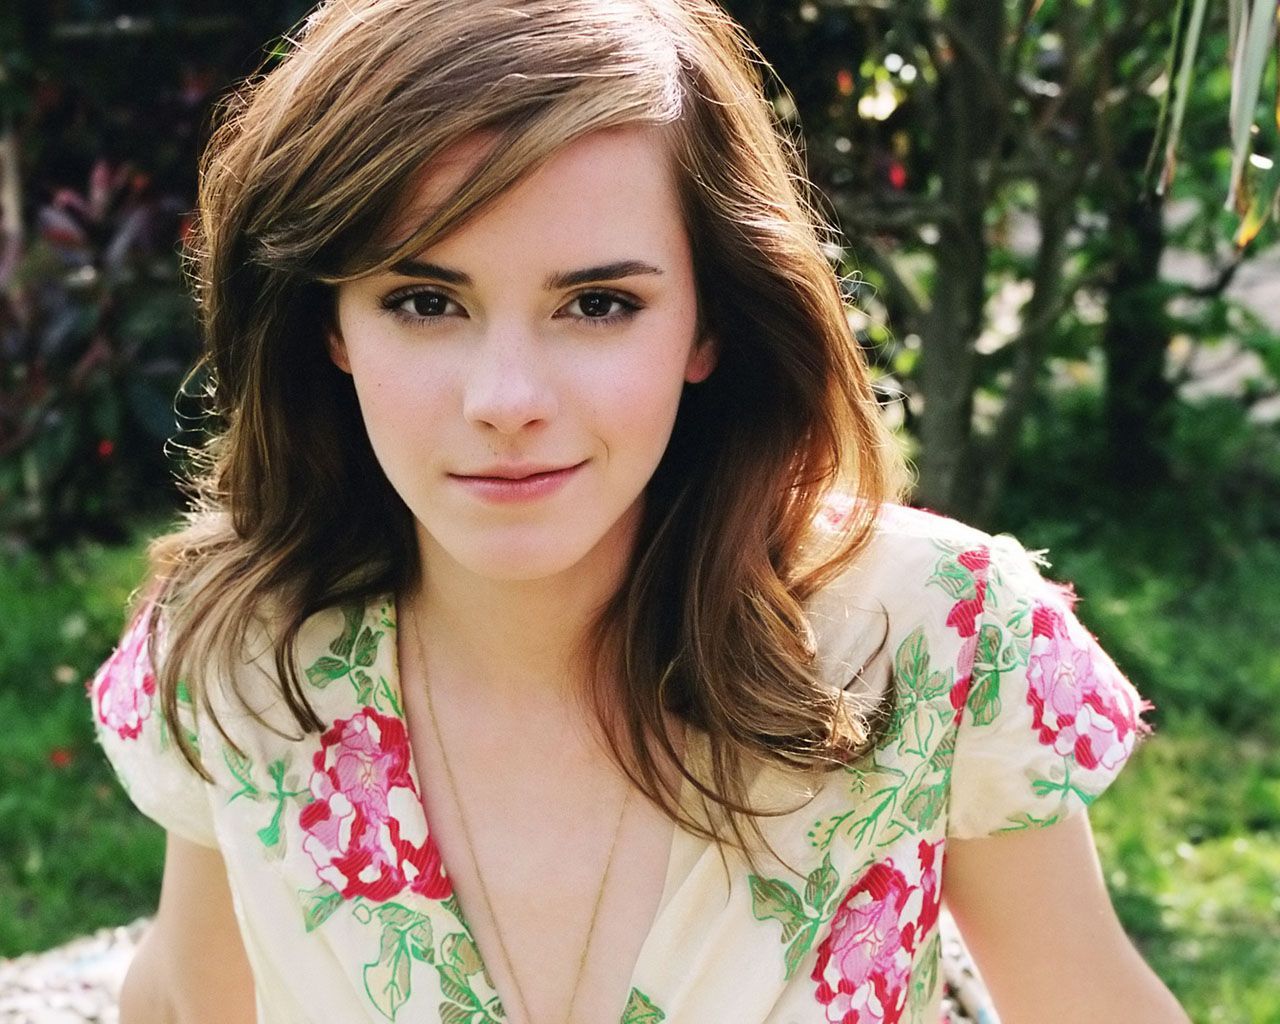 Emma Watson Wallpaper: HD, 4K, 5K for PC and Mobile. Download free image for iPhone, Android